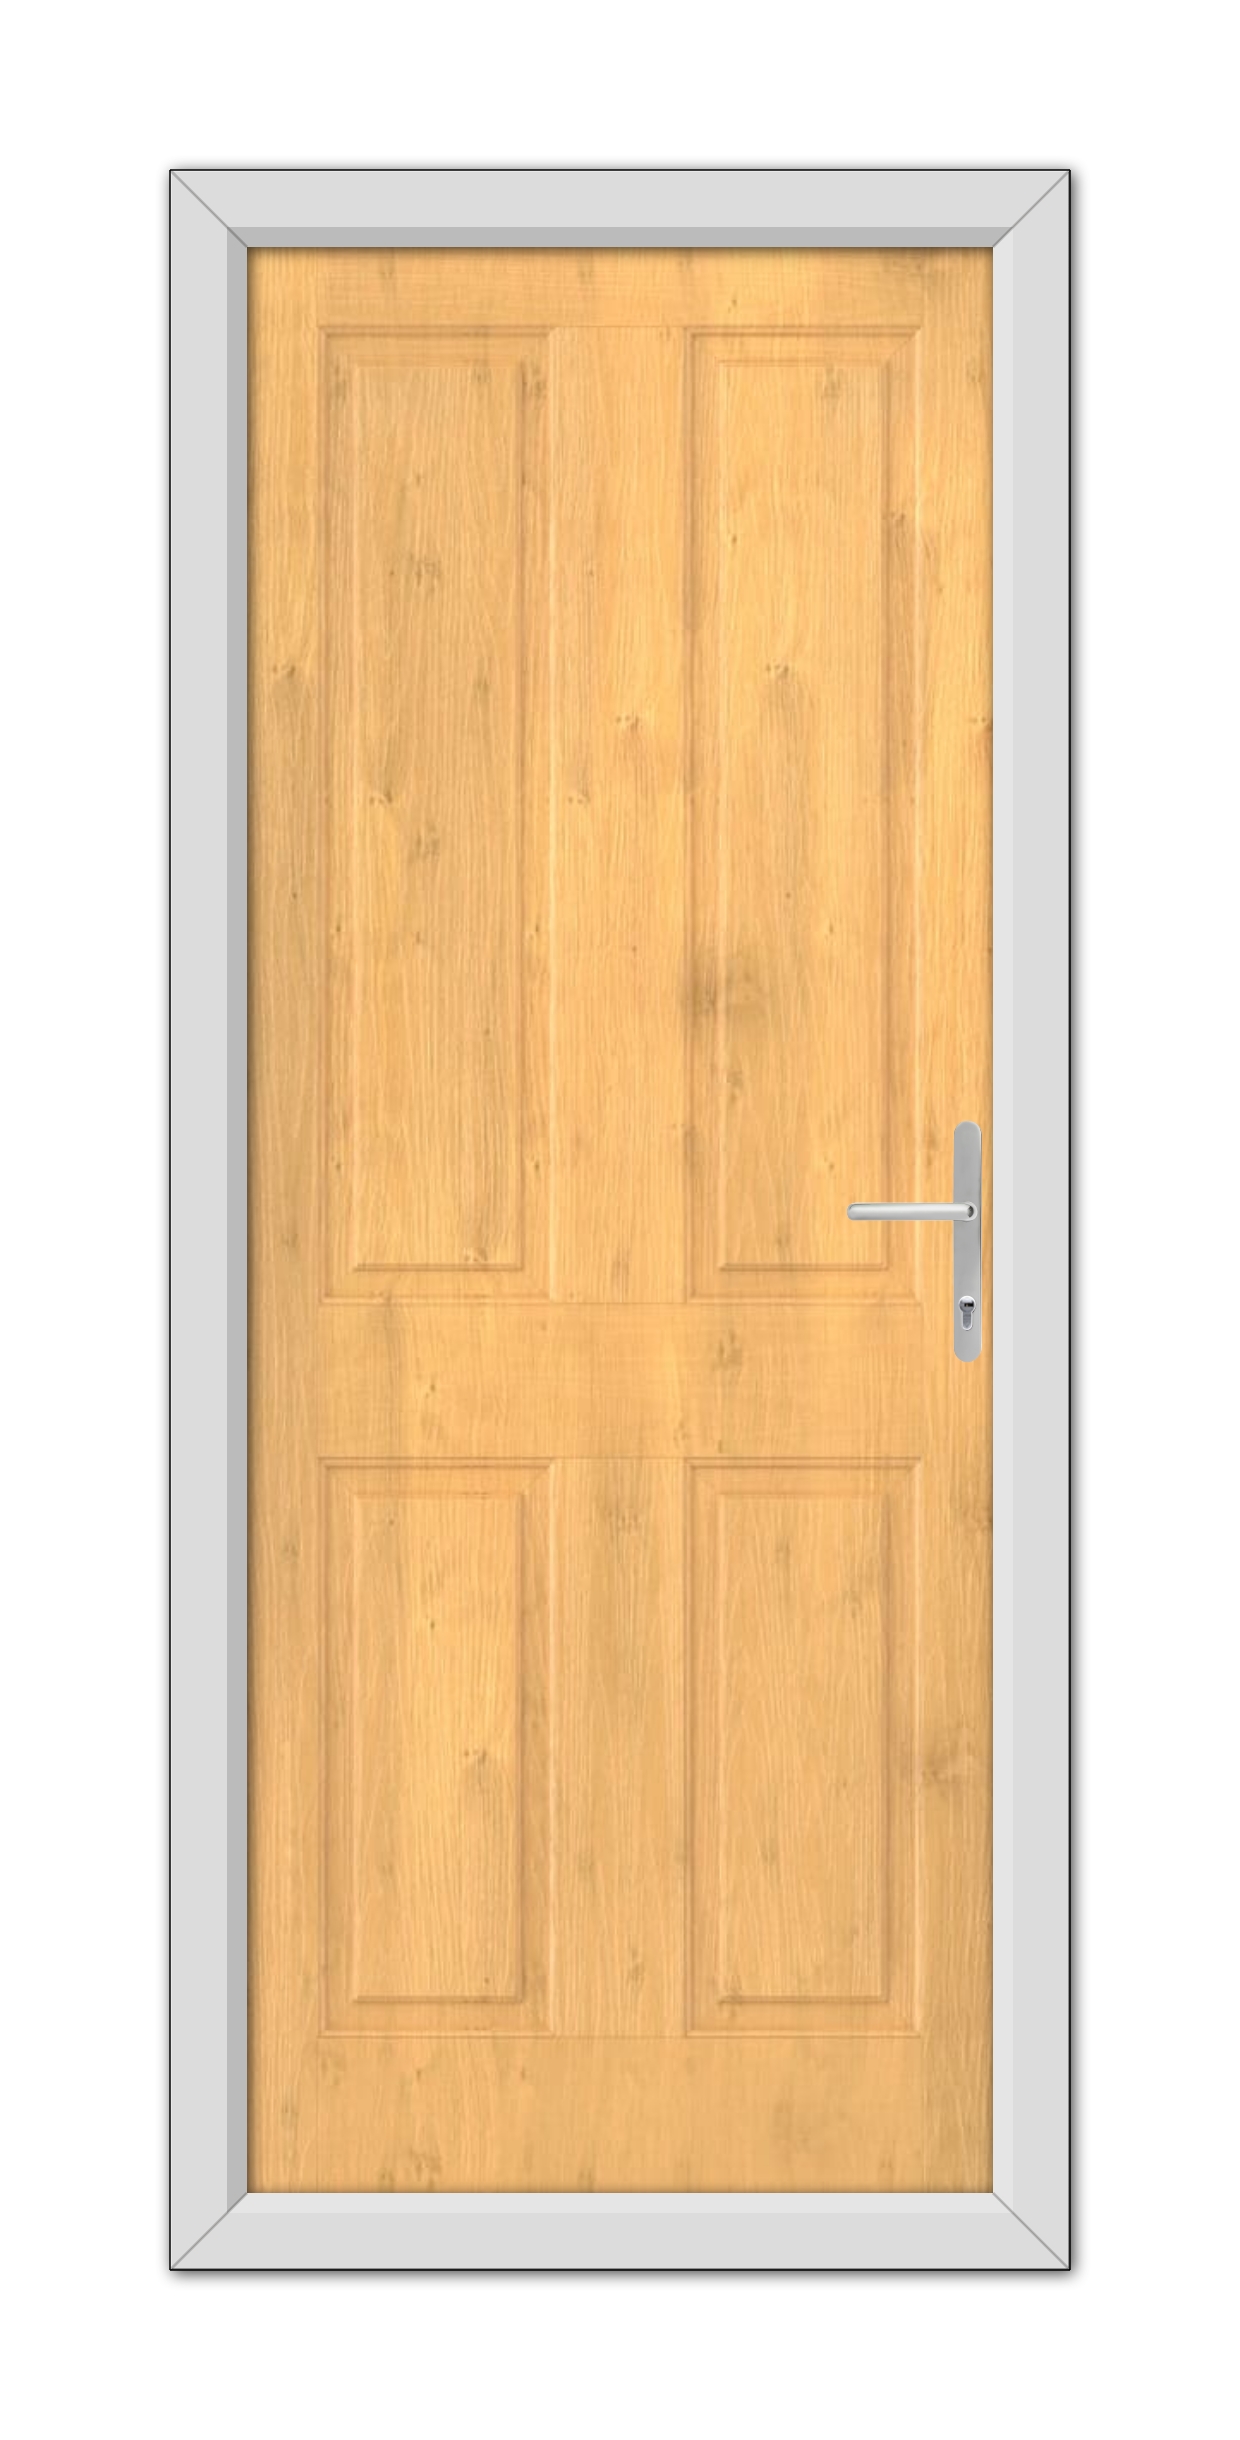 A Irish Oak Whitmore Solid Composite Door 48mm Timber Core with a metallic handle set in a gray frame, viewed head-on.